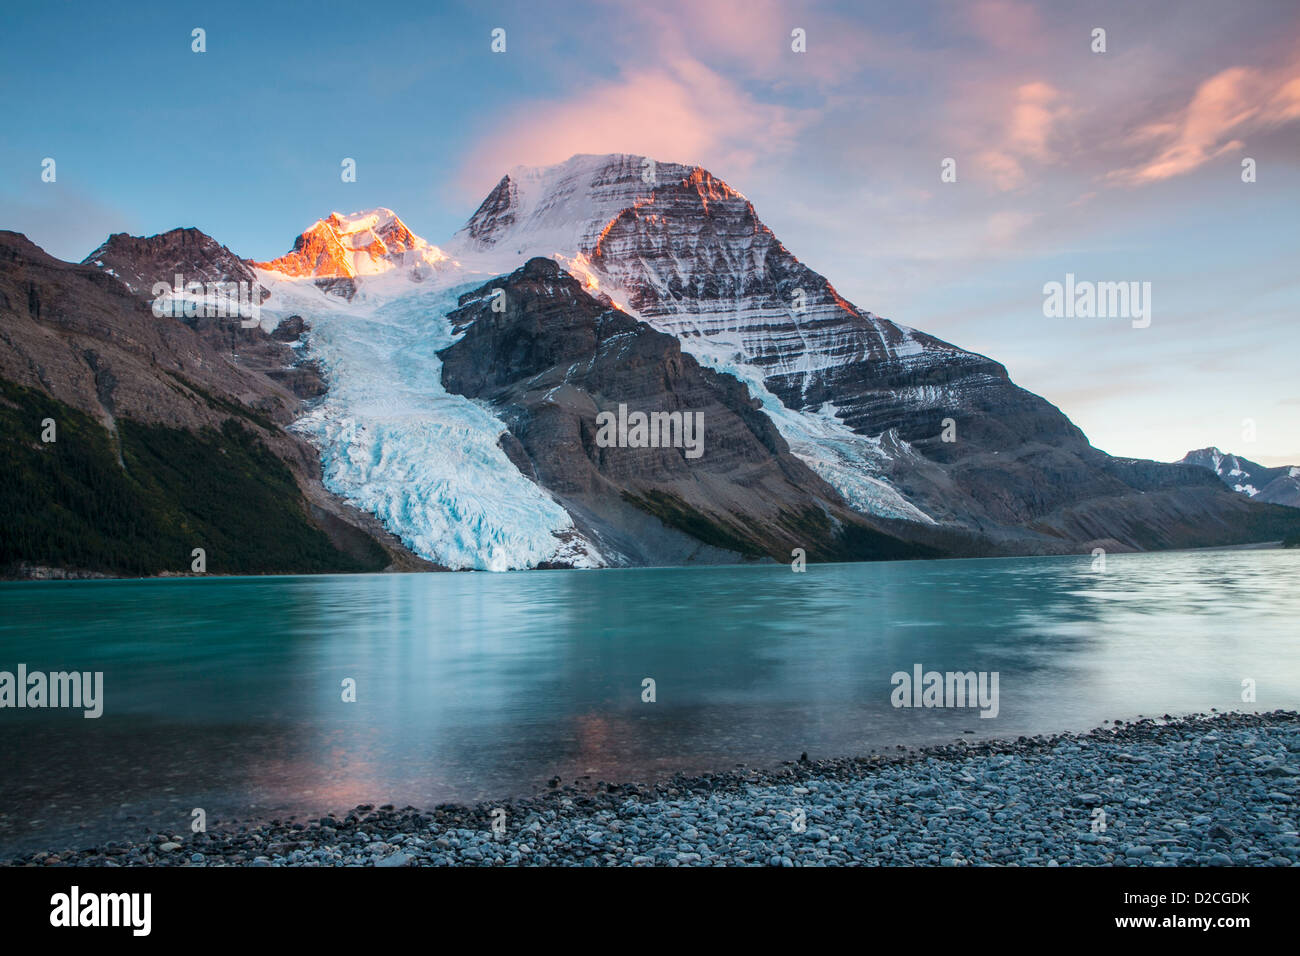 Evening light on Mount Robson above Berg Lake, Robson Provincial Park, Canadian Rockies, British Columbia, Canada. Stock Photo